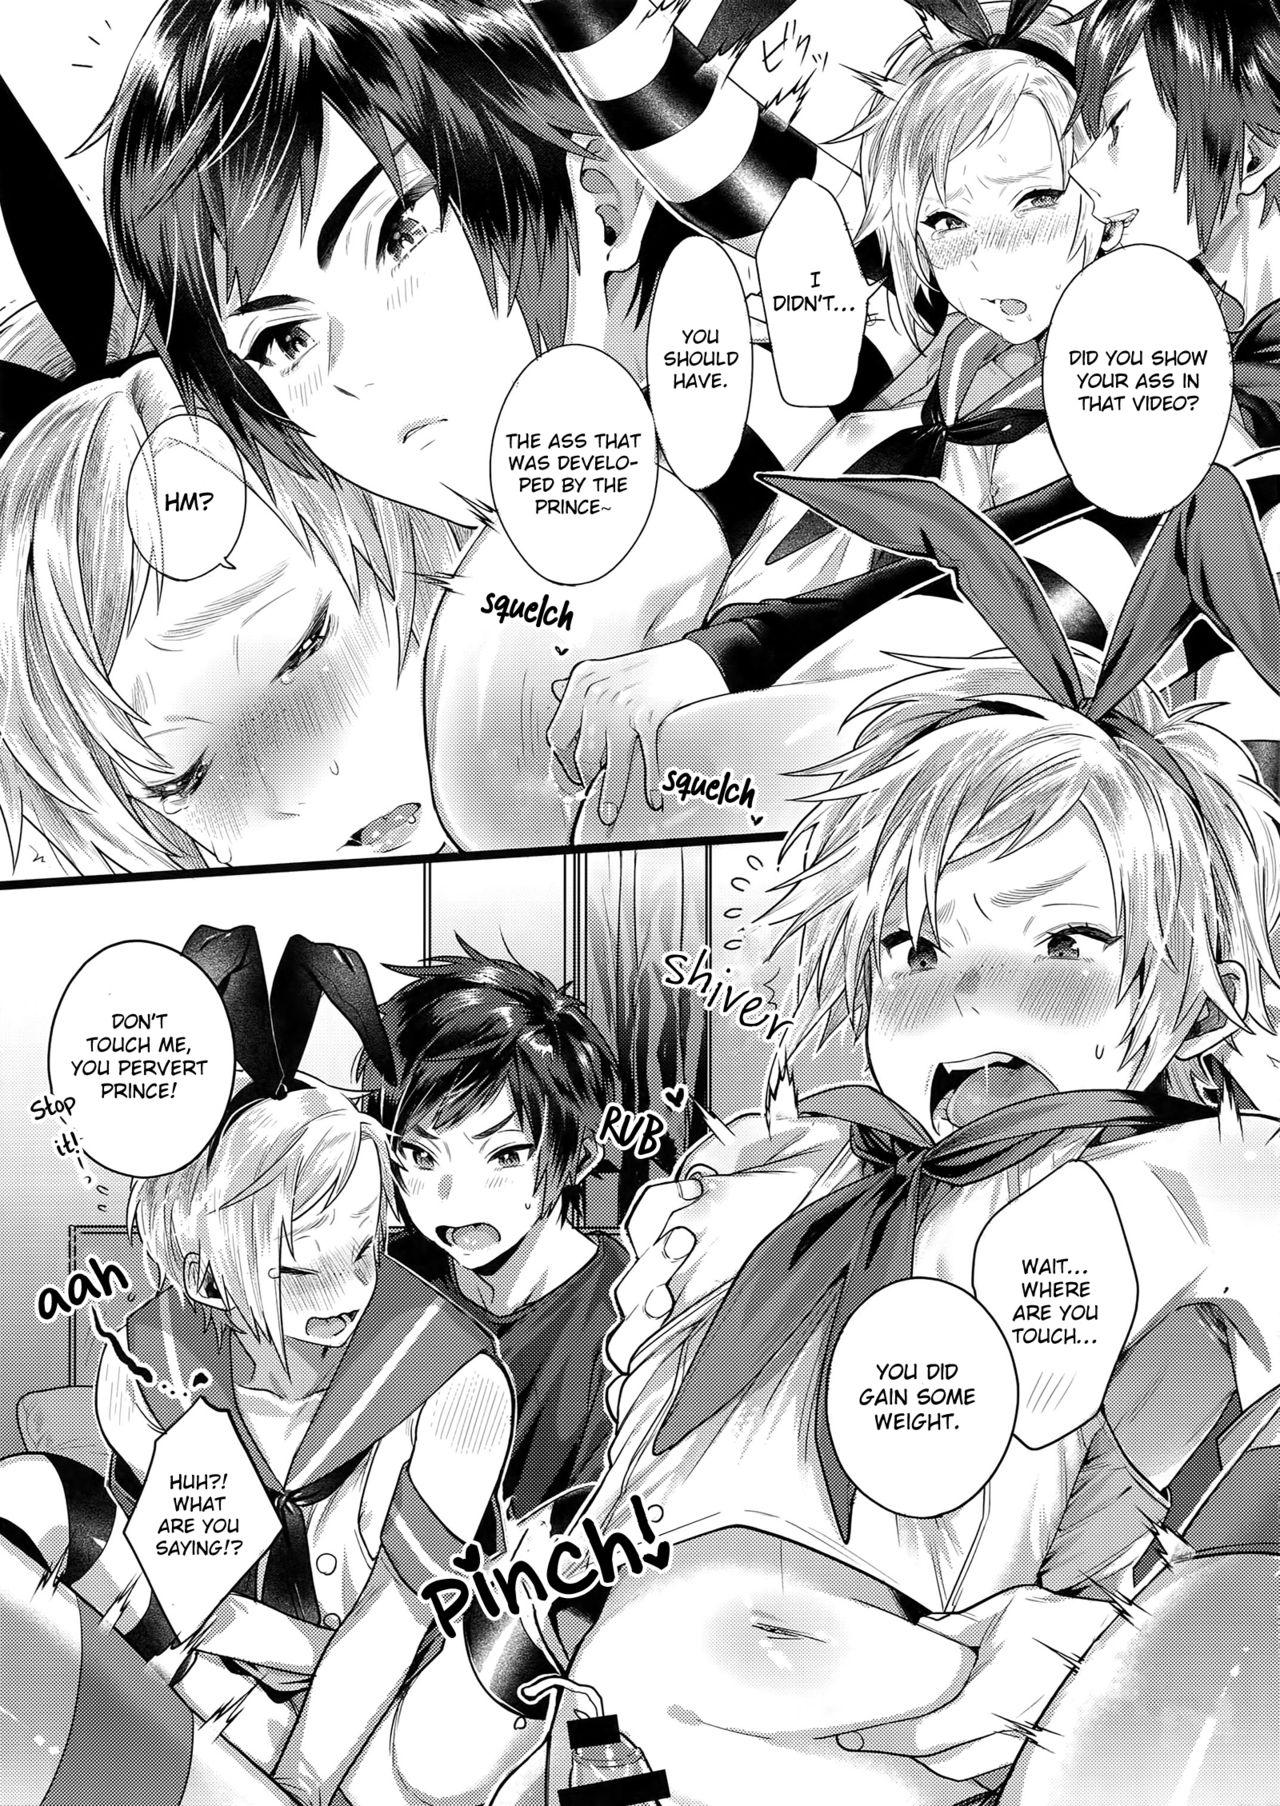 Insane Porn Taikei Iji no Shudan | Prompto Argentum-kun's Means For Maintaining His Body Shape! - Kantai collection Final fantasy xv Grosso - Page 8